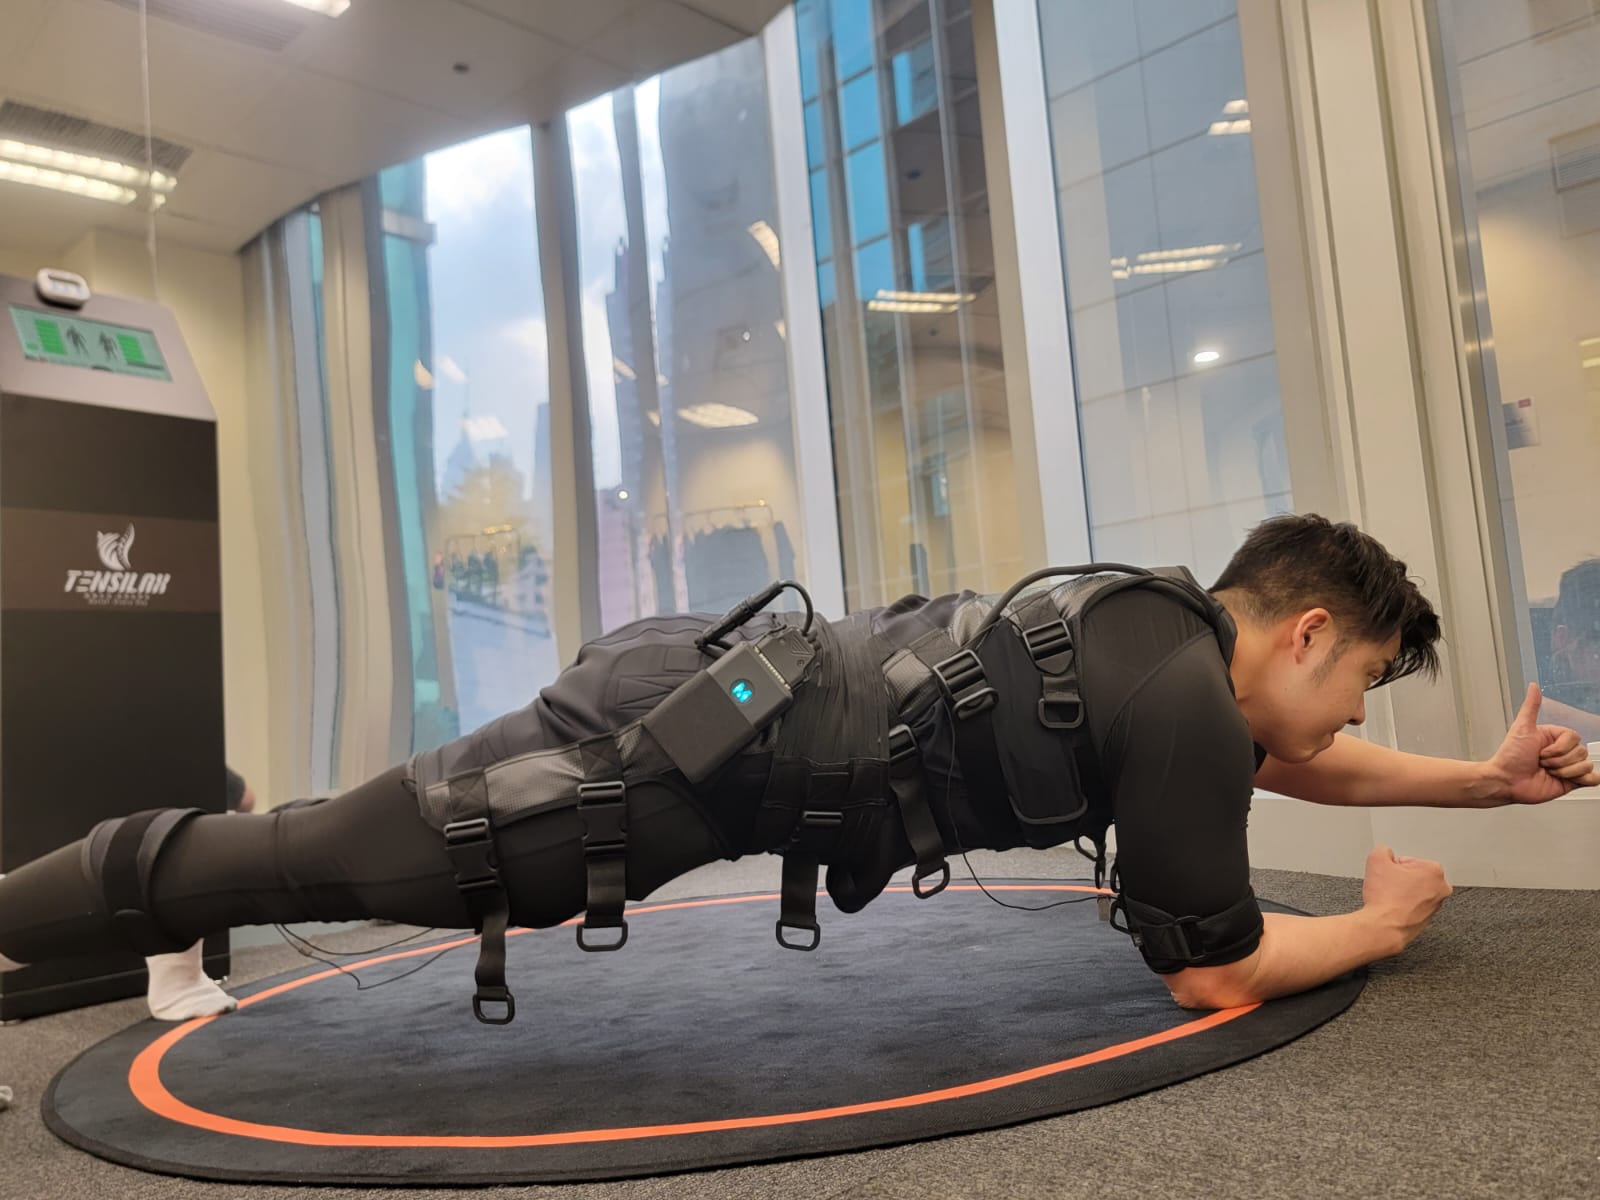 <img src="A male doing a plank pose, while single arm support the body, the other arm in the middle of air, wearing electric suits stimulating abdominal muscles="男子示範單臂平板支撐，身穿電刺激衣服作刺激腹部訓練">